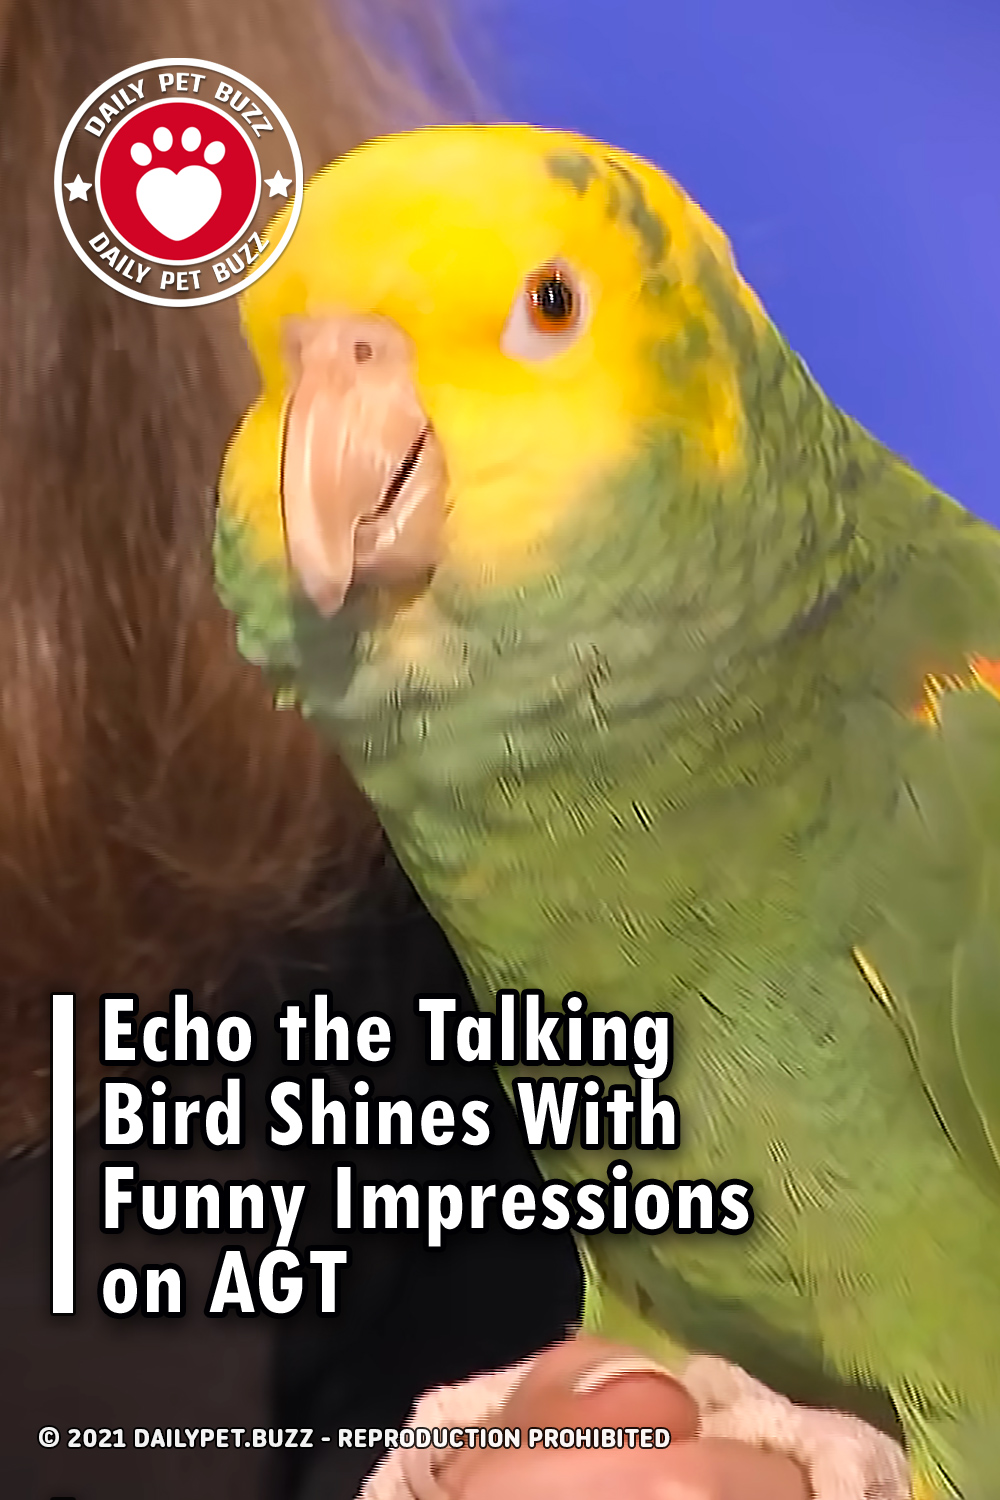 Echo the Talking Bird Shines With Funny Impressions on AGT